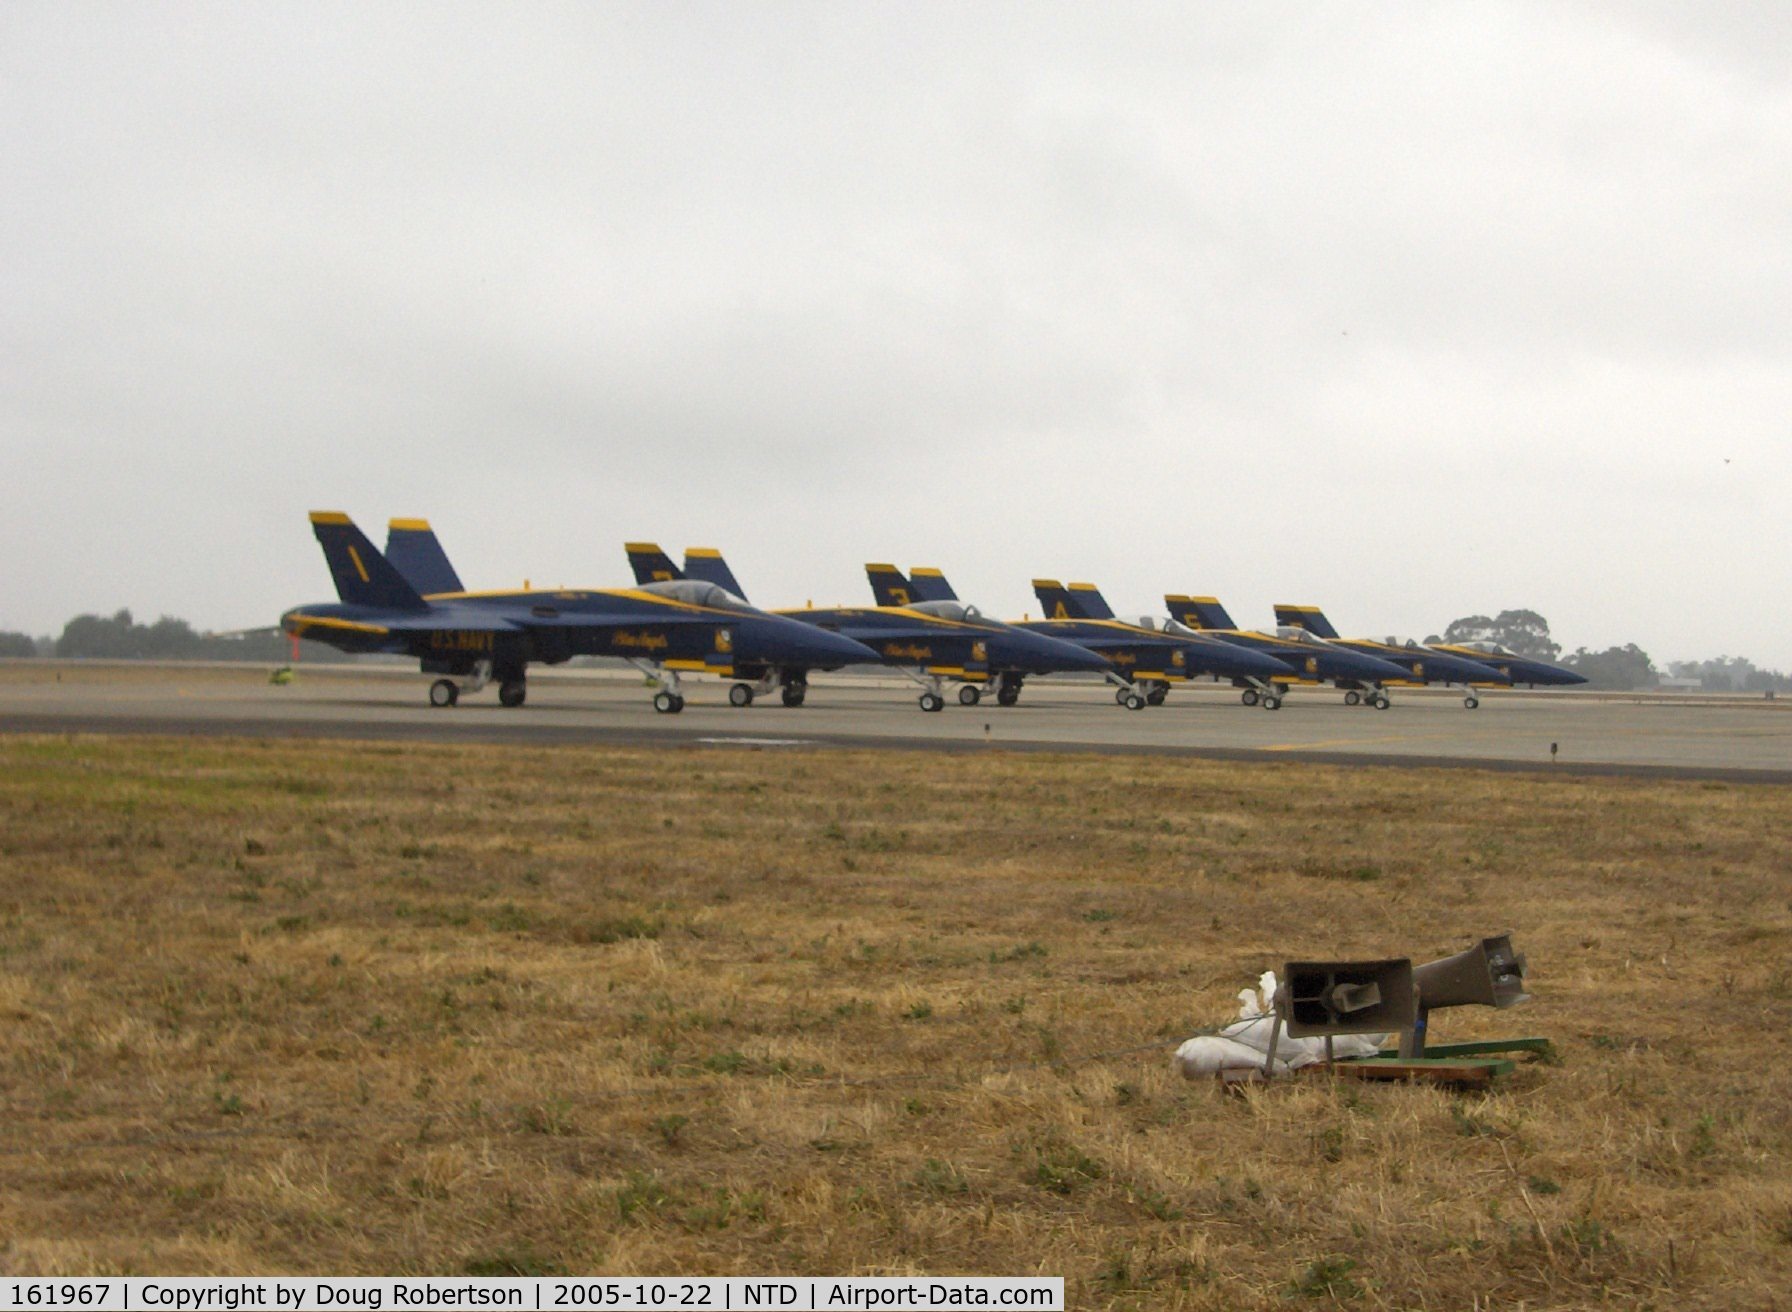 161967, McDonnell Douglas F/A-18A Hornet C/N 0183/A144, The USN Blue Angels Boeing F/A-18s, The Blues' Airshow grounded both days-low 800 foot ceiling. Aircraft #1-161967